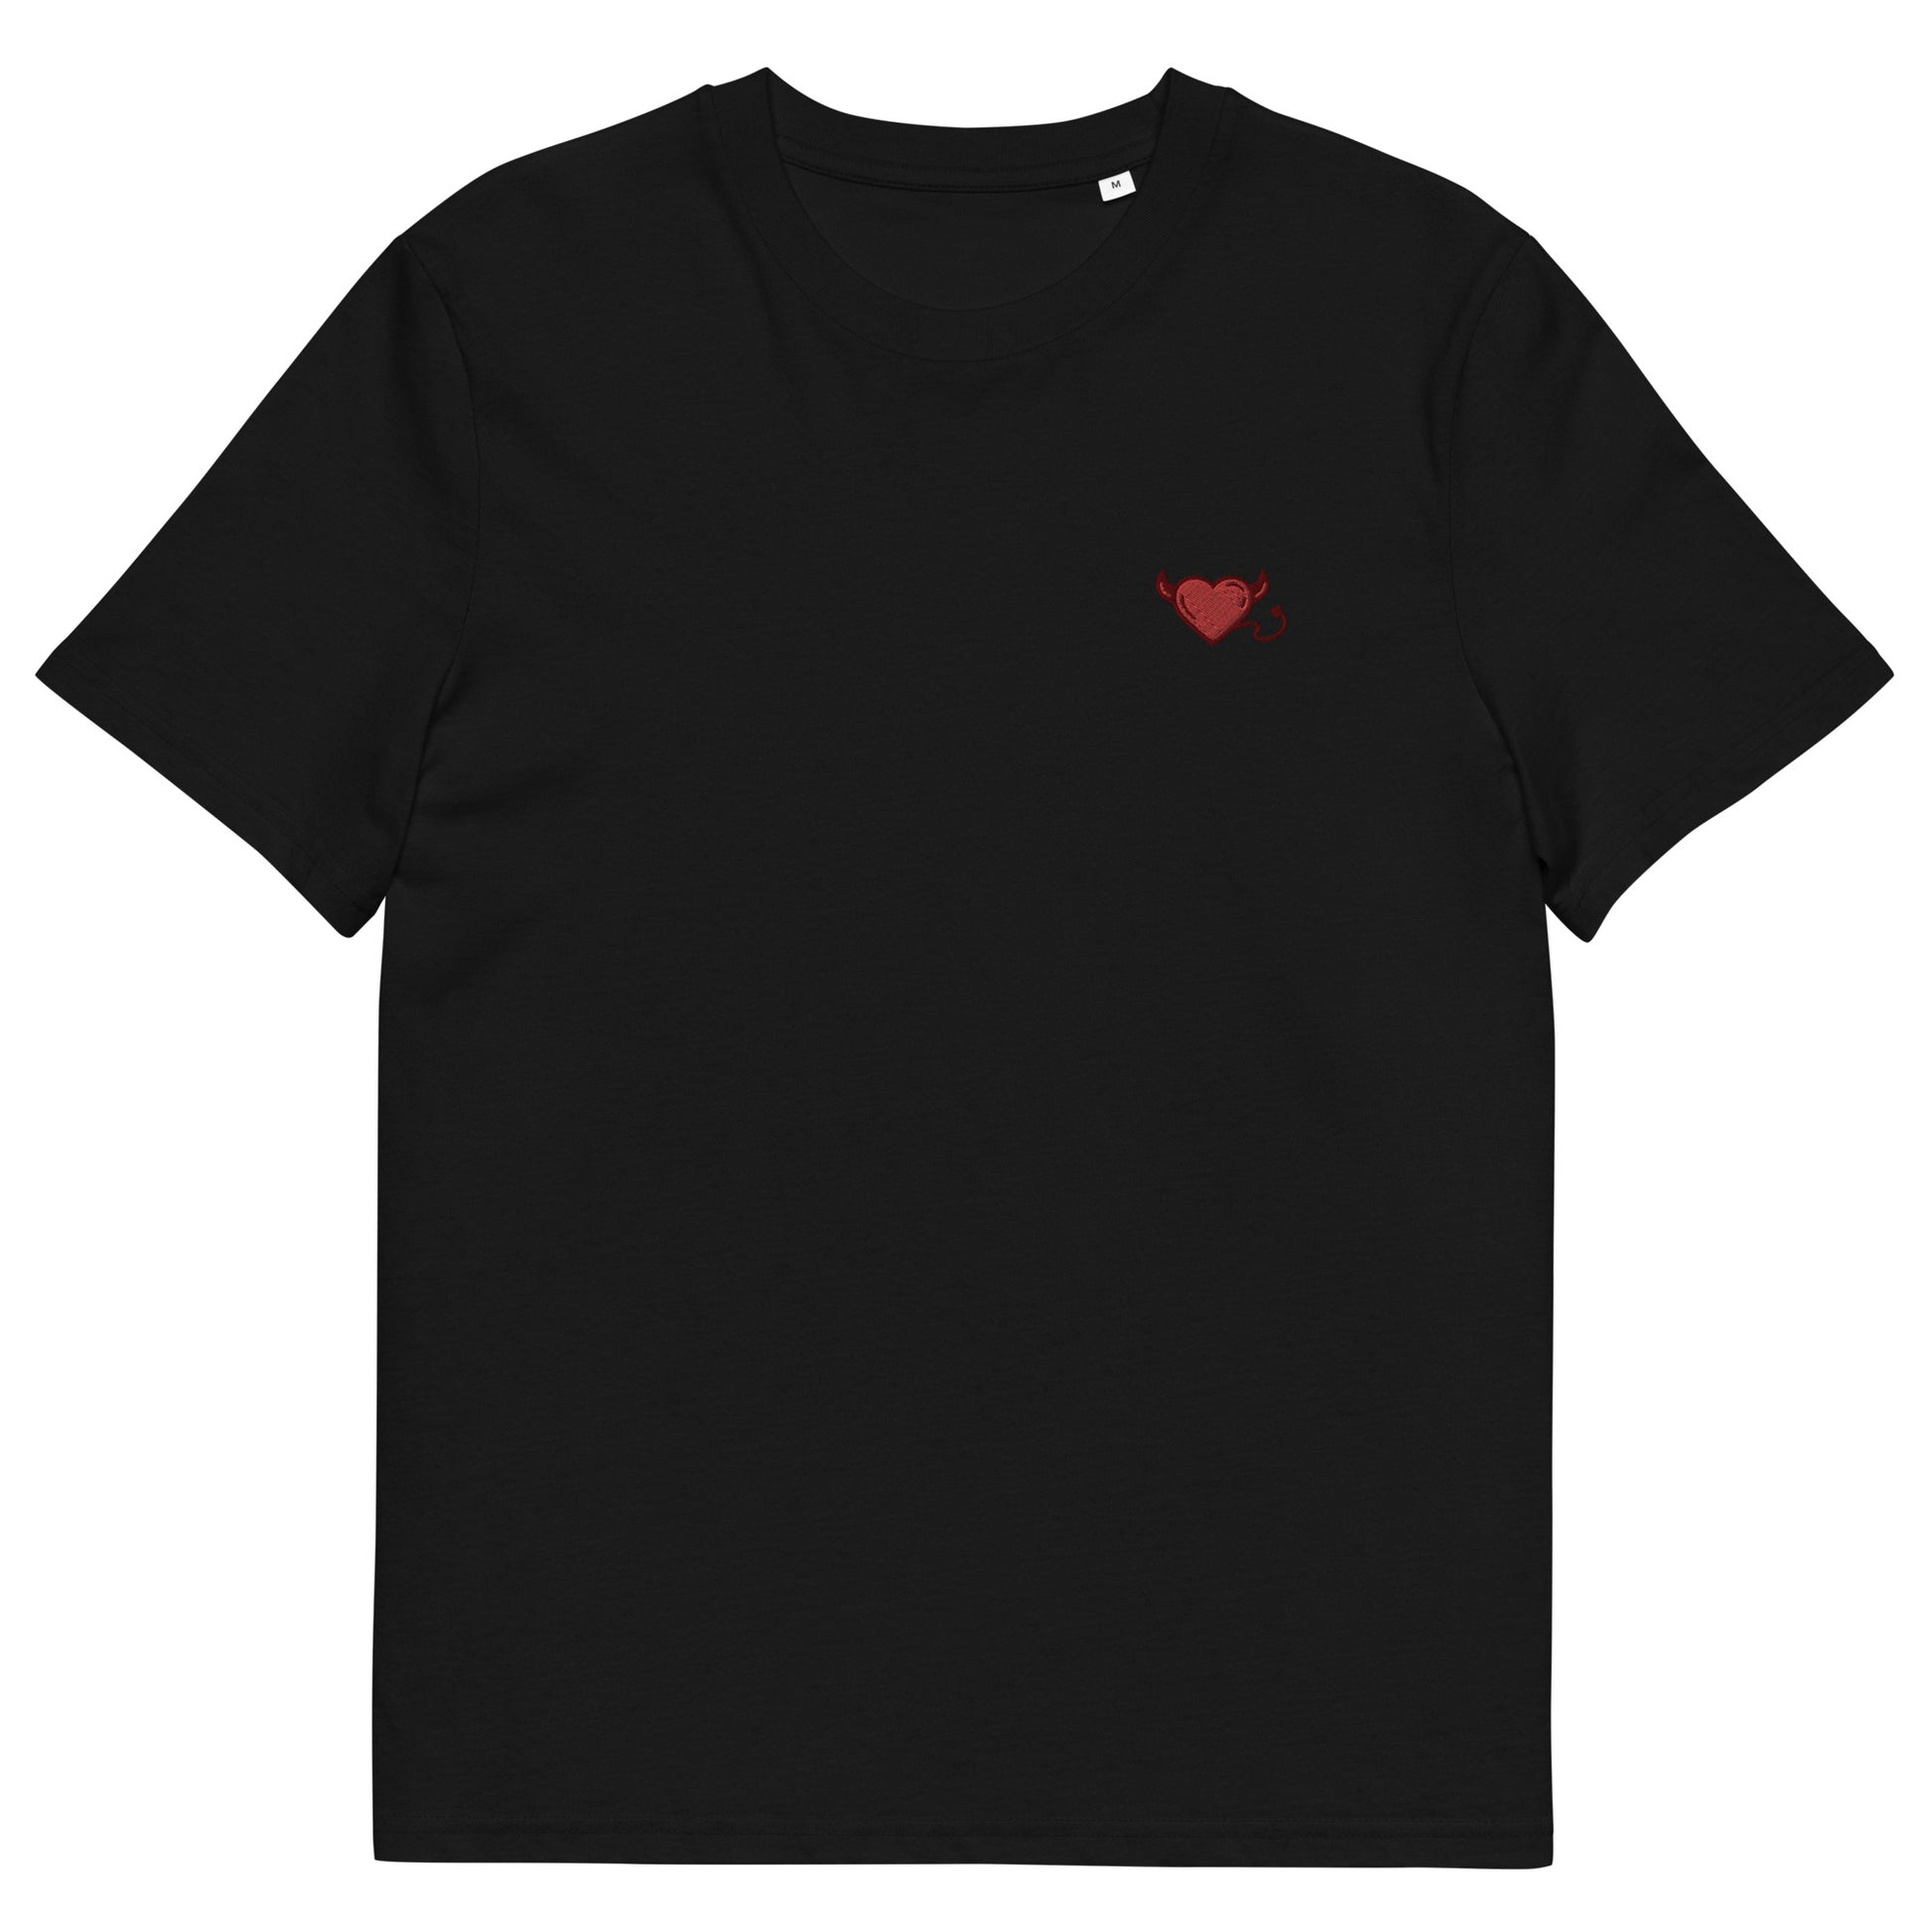 Fitted black t-shirt with a red devil's heart embroidered on the left chest. 